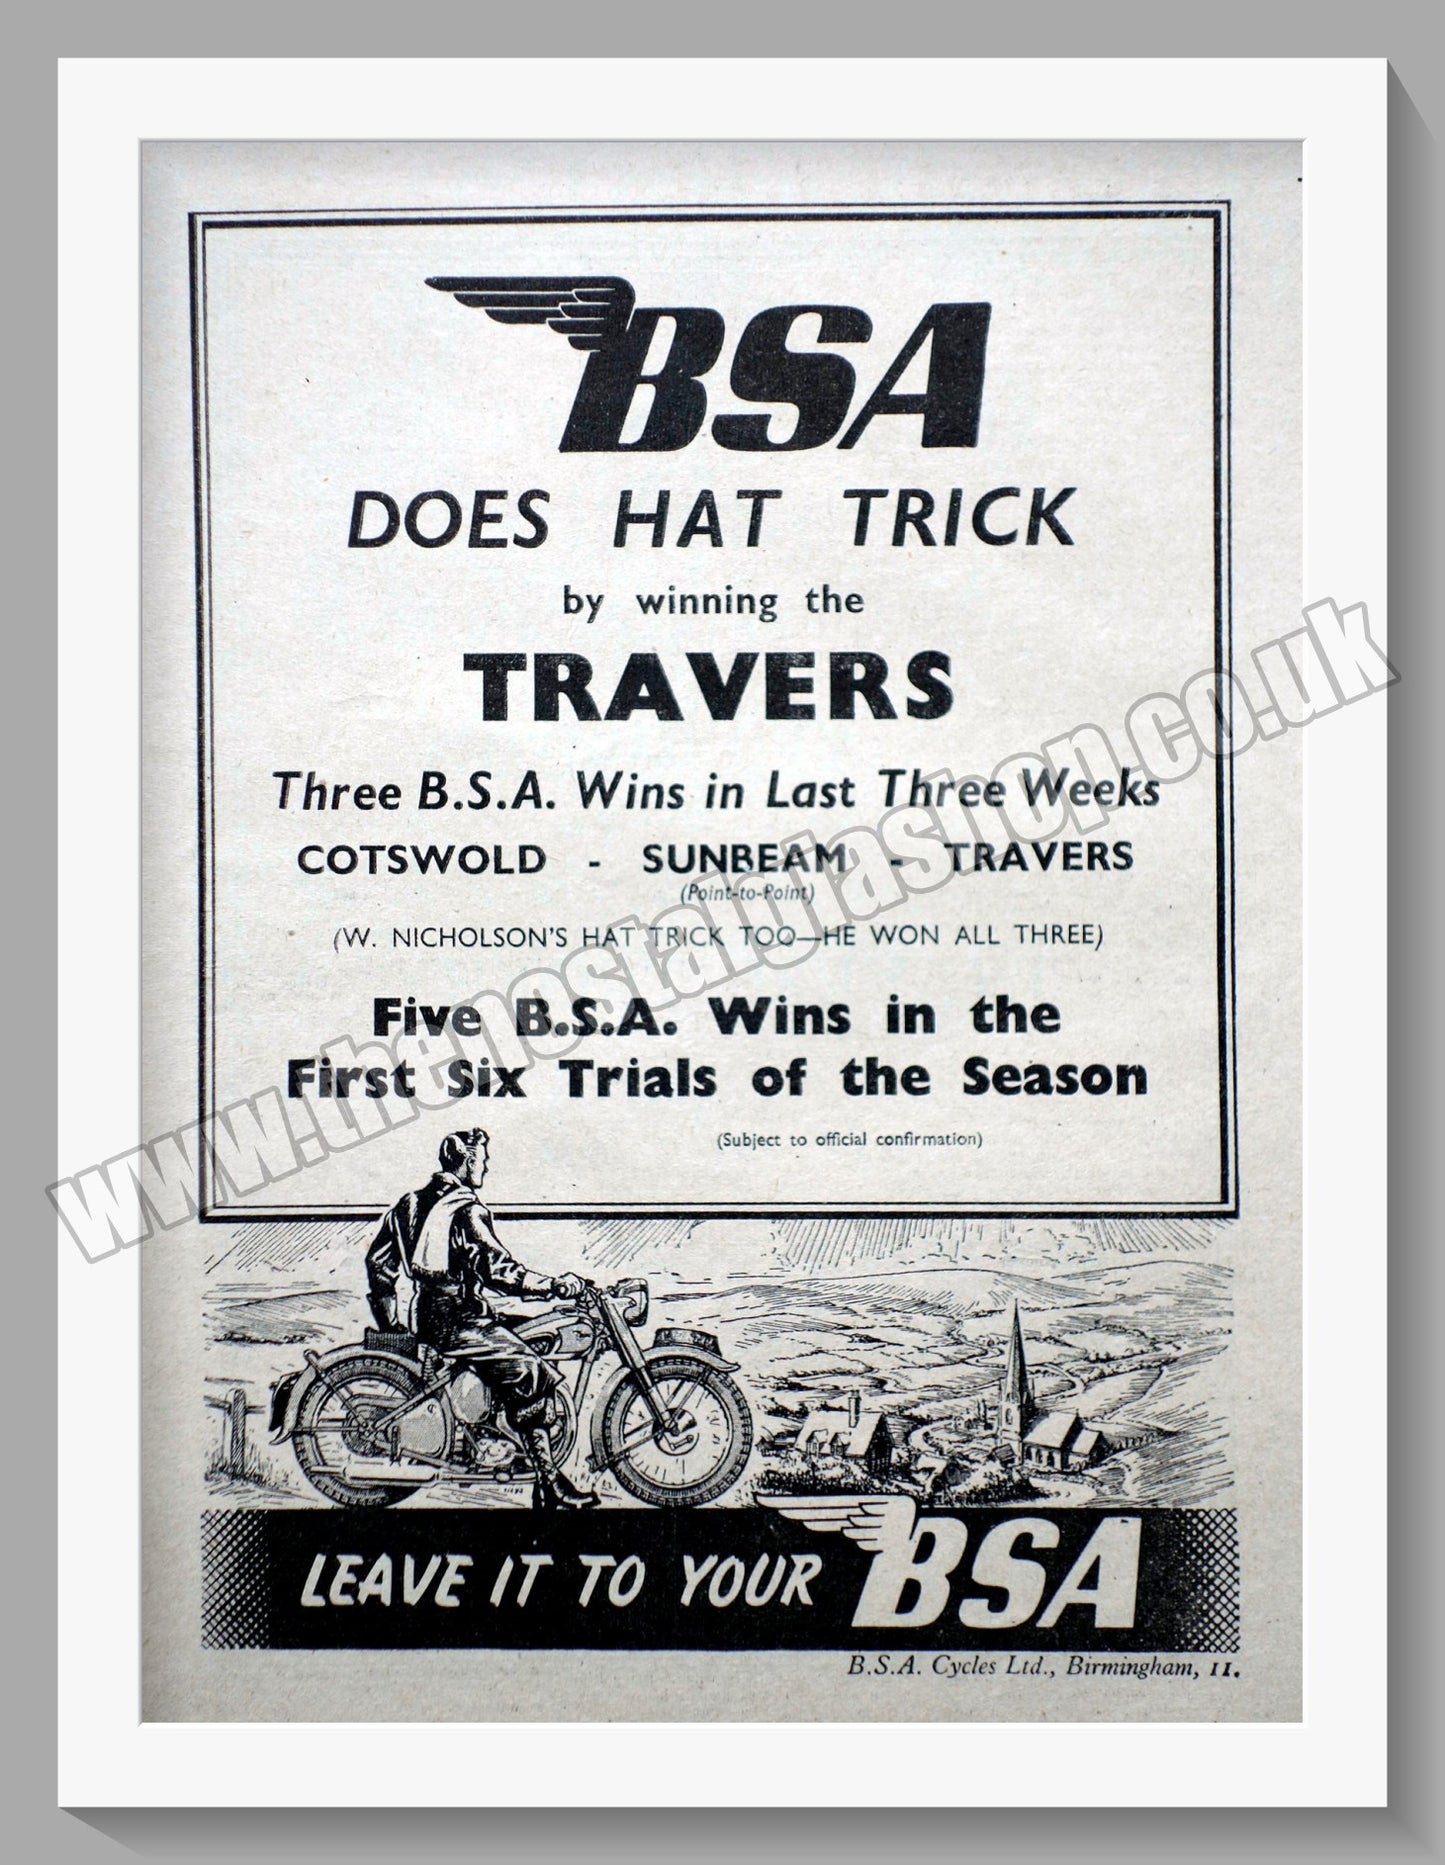 BSA Does a Hat Trick by Winning The Travers. Original Advert 1947 (ref AD56646)